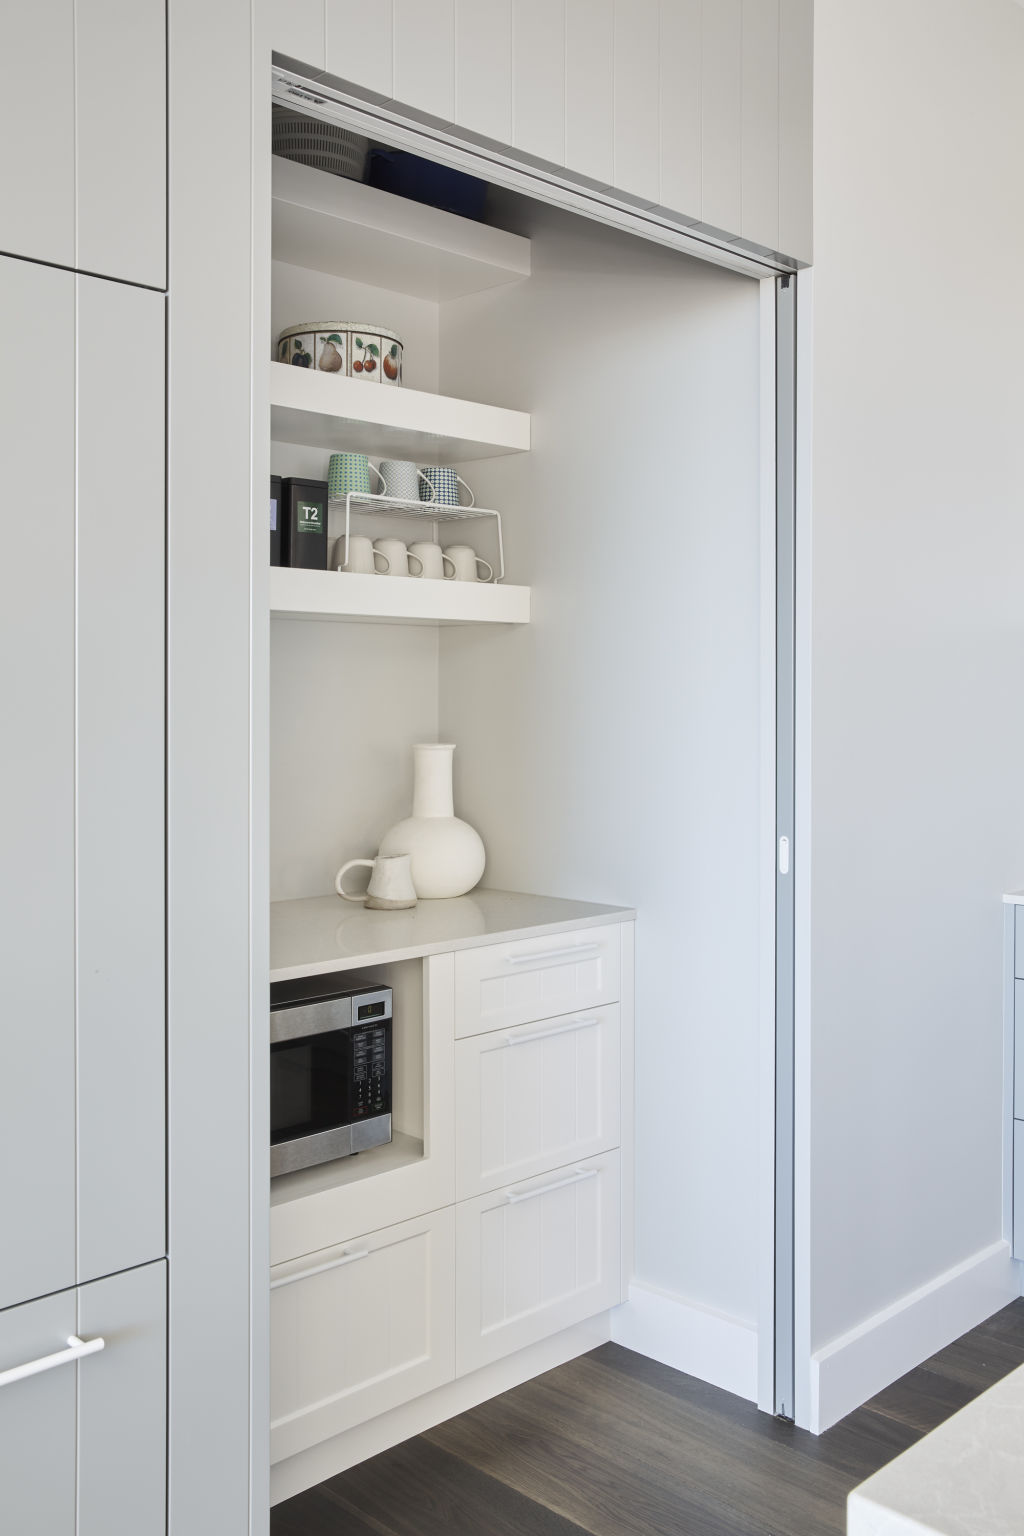 Storage is key when it comes to creating more space in a kitchen. Annie Bowen interior design. Photo: Sue Stubbs